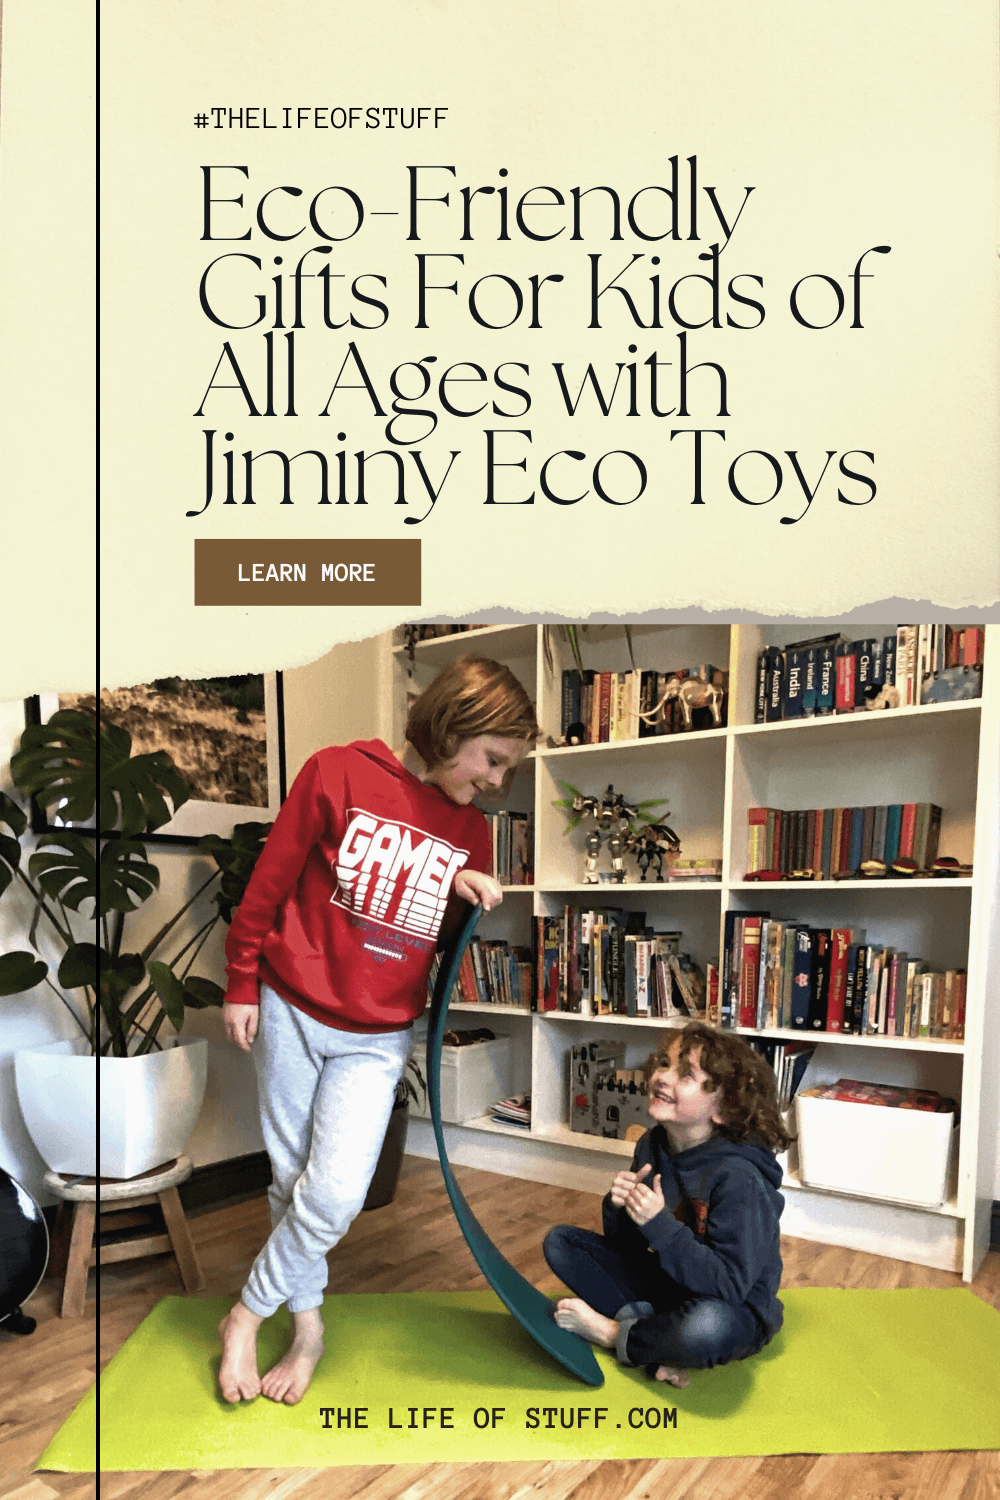 Eco-Friendly Gifts For Kids of All Ages with Jiminy Eco Toys - The Life of Stuff